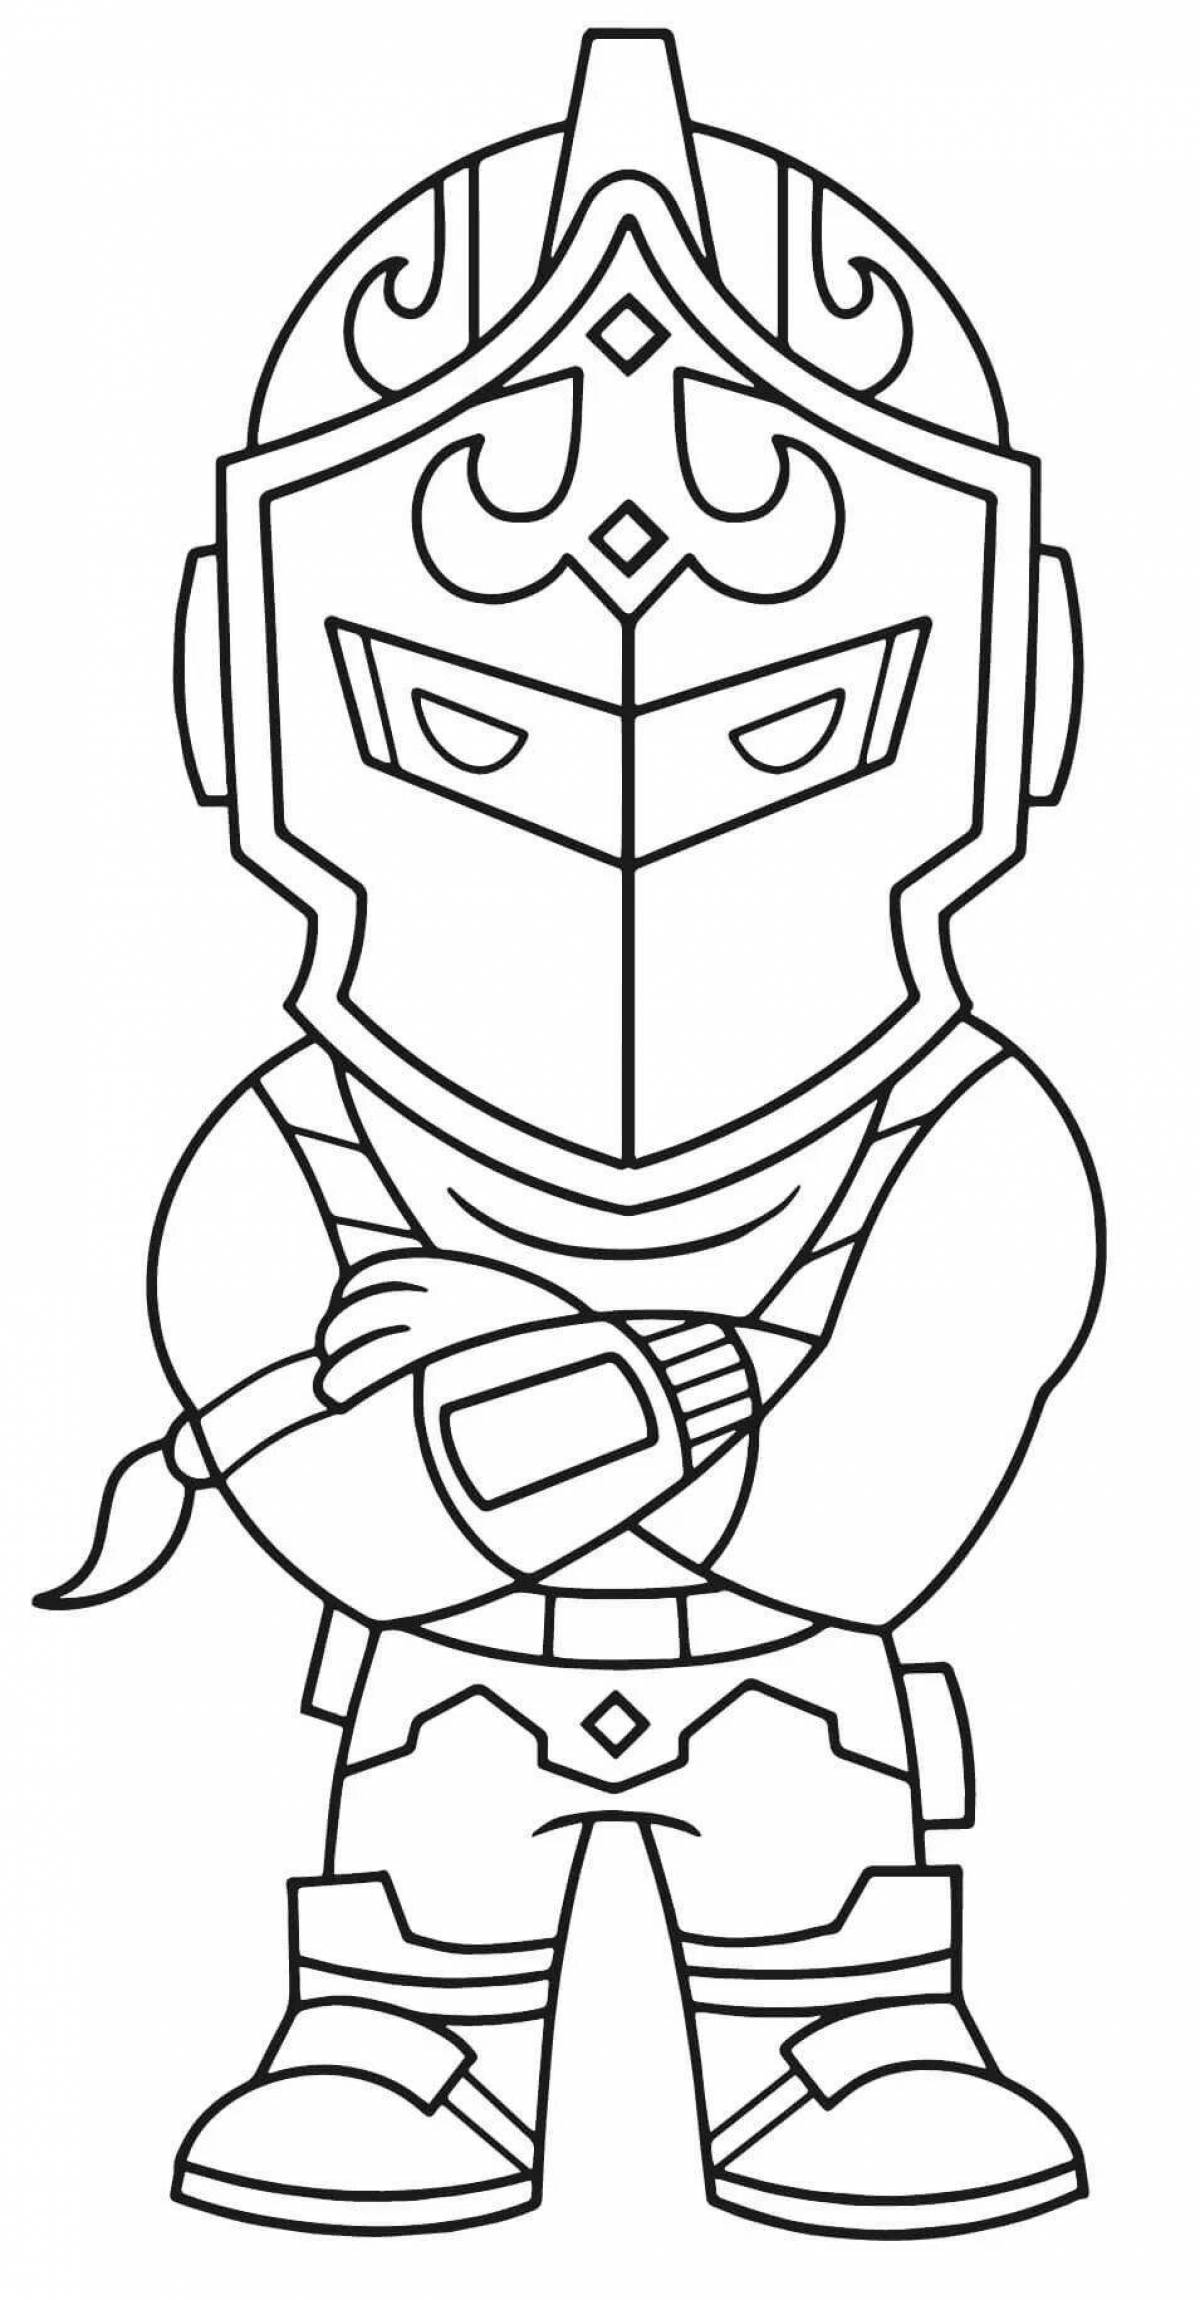 Glorious wanderer coloring page